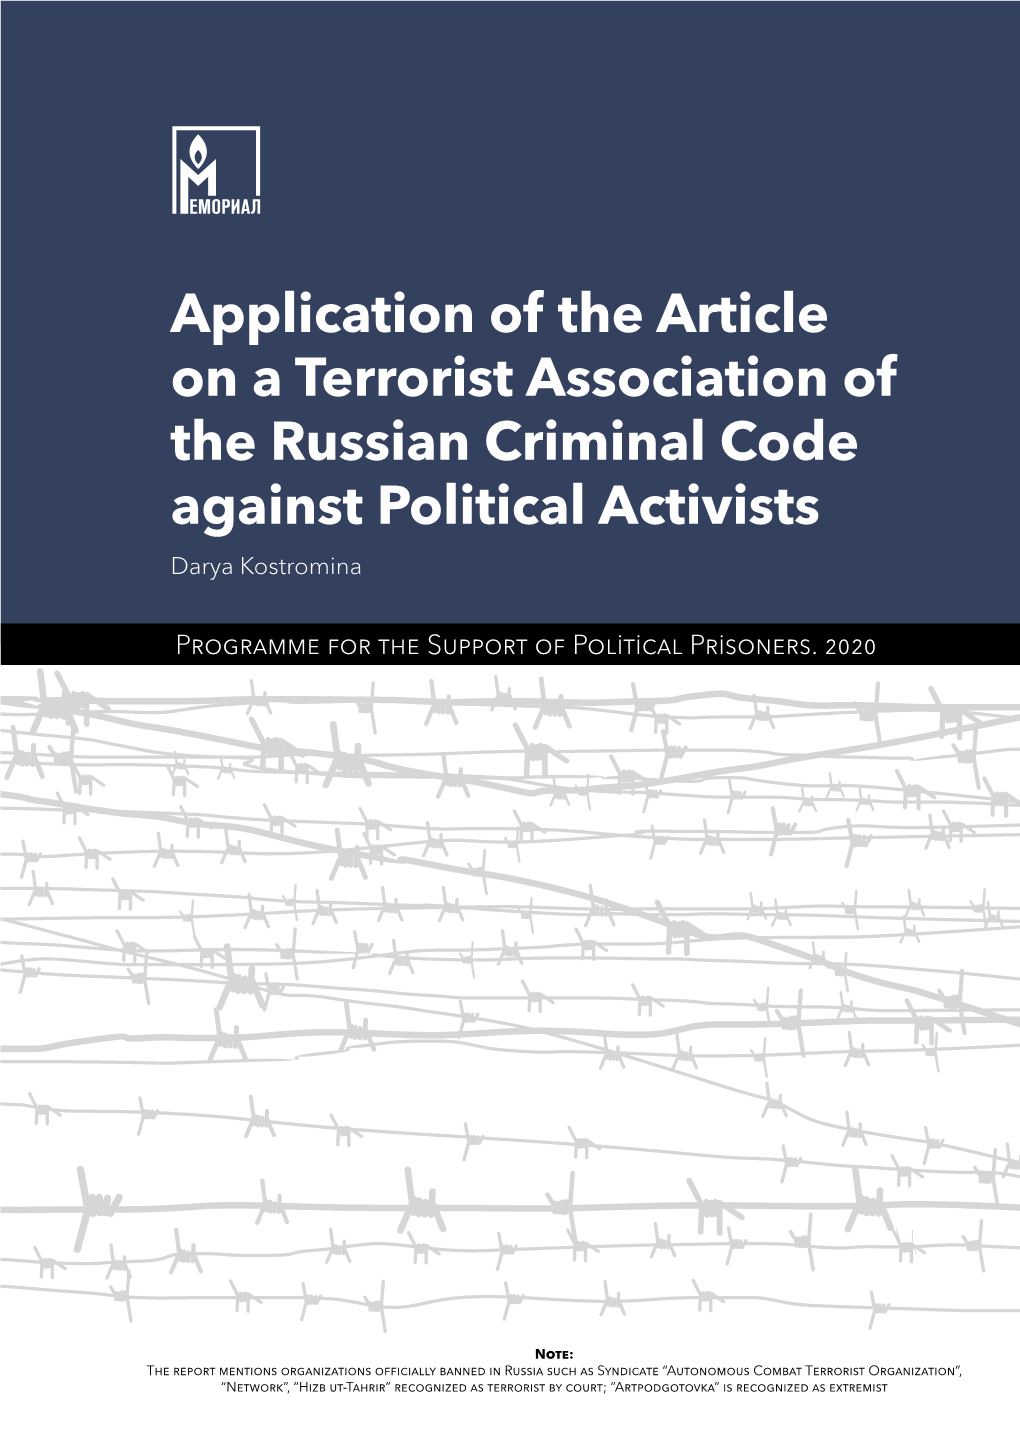 Application of the Article on a Terrorist Association of the Russian Criminal Code Against Political Activists Darya Kostromina